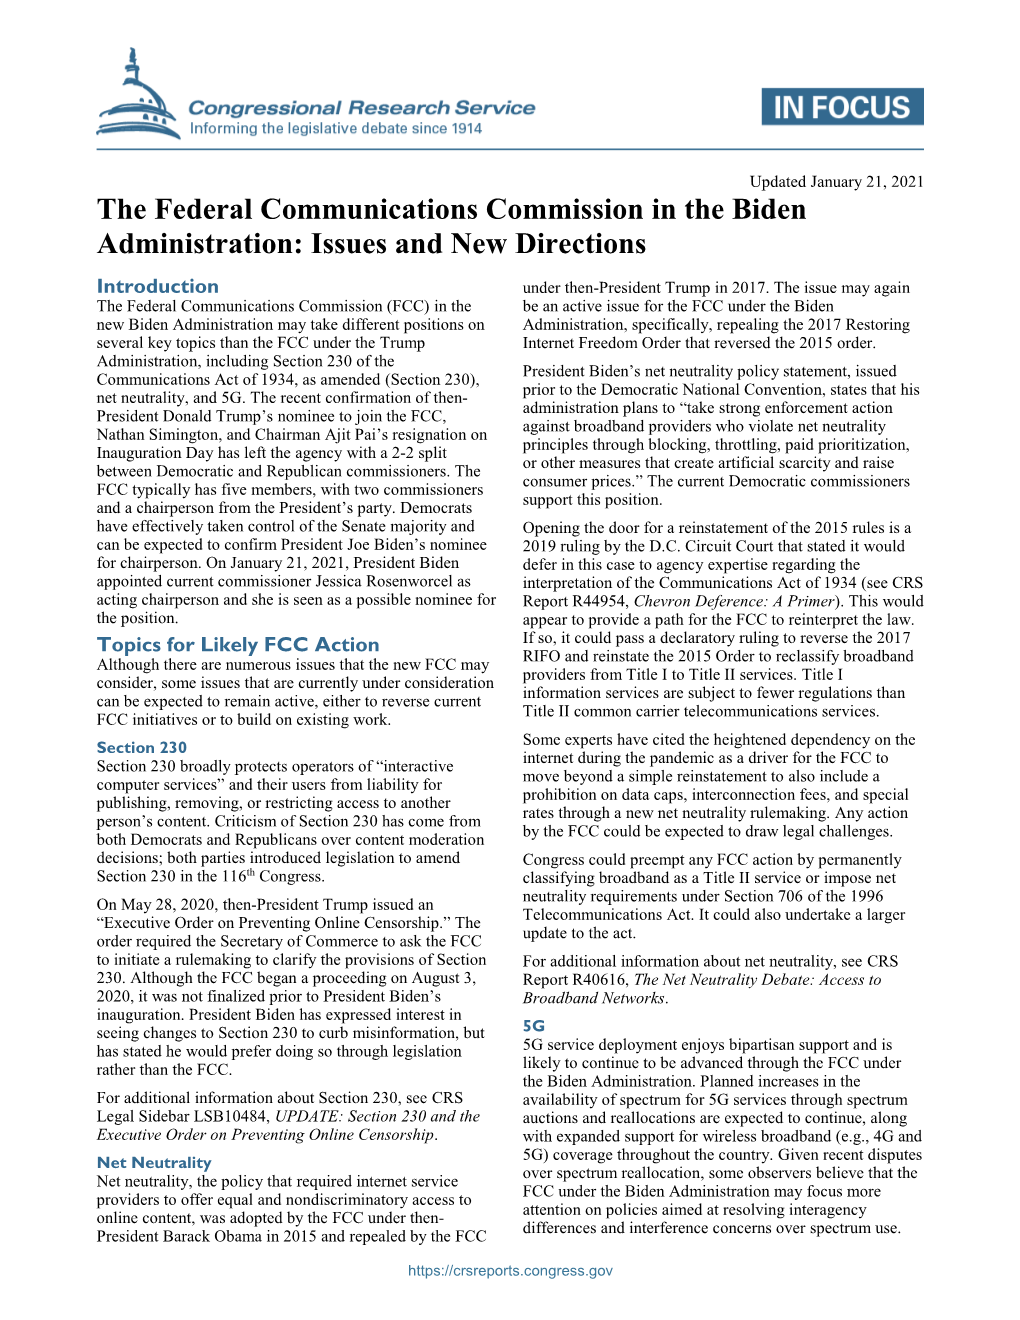 The Federal Communications Commission in the Biden Administration: Issues and New Directions